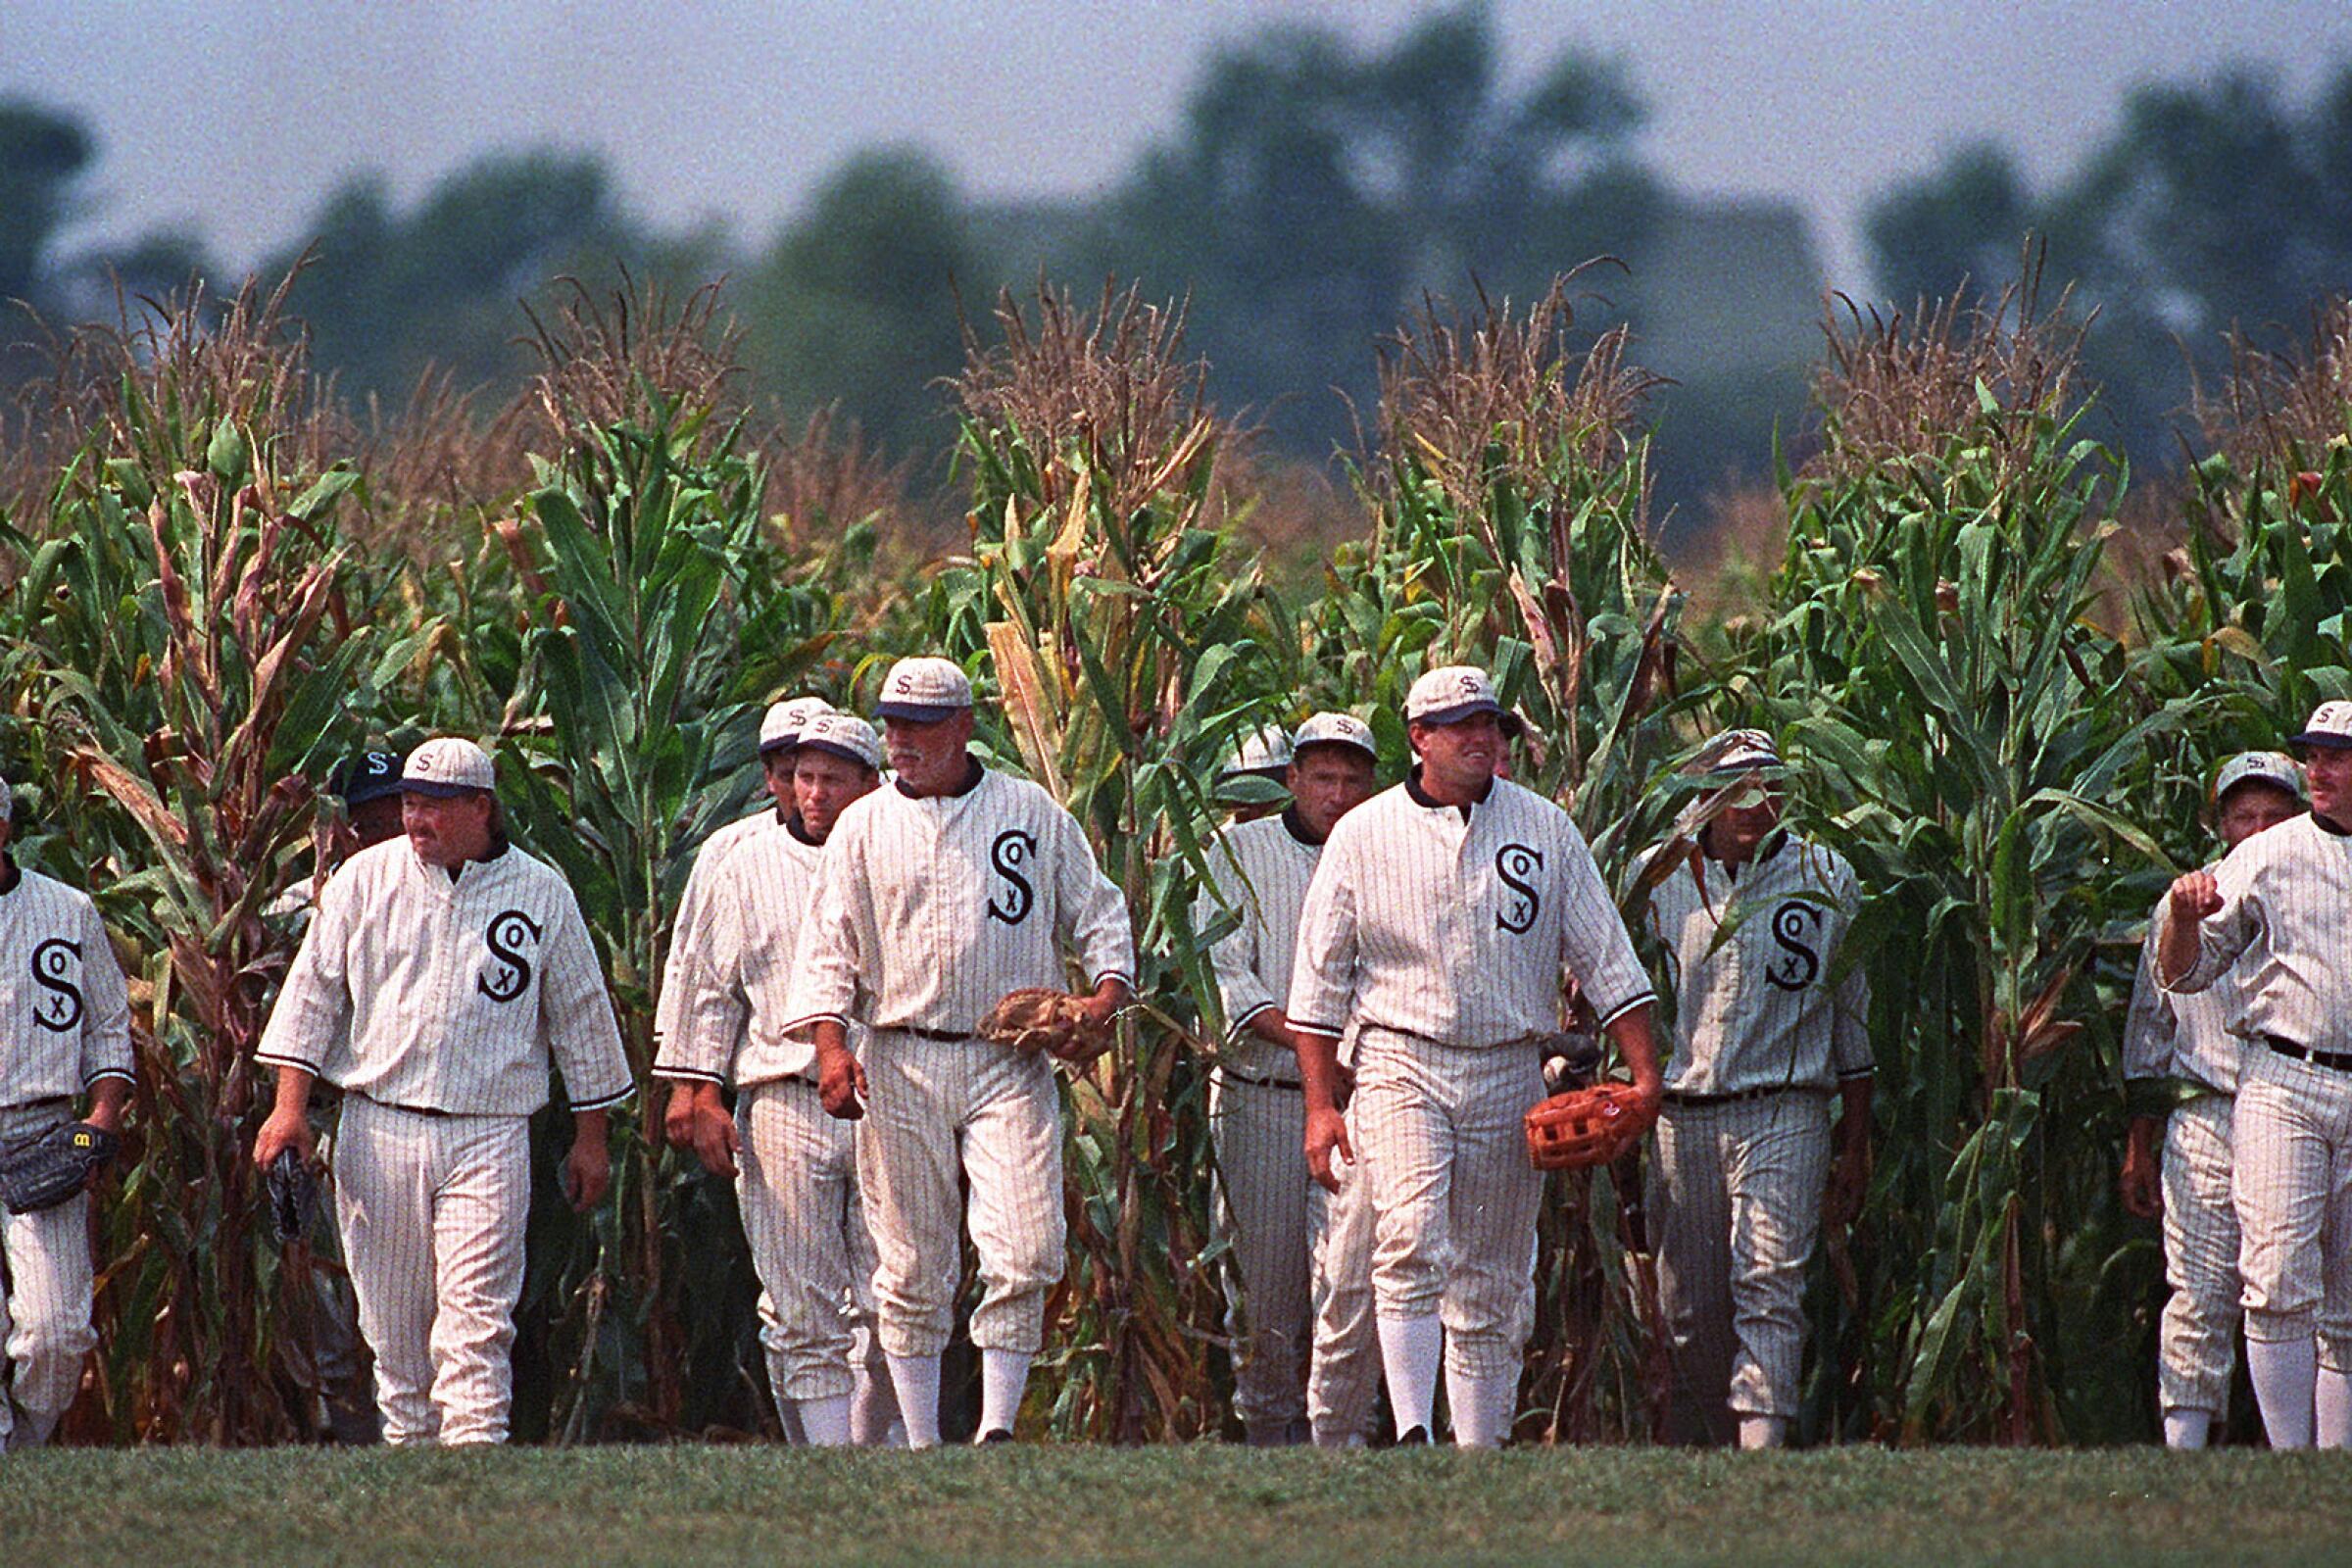 MLB Field of Dreams Game TV coverage, location, uniforms & more